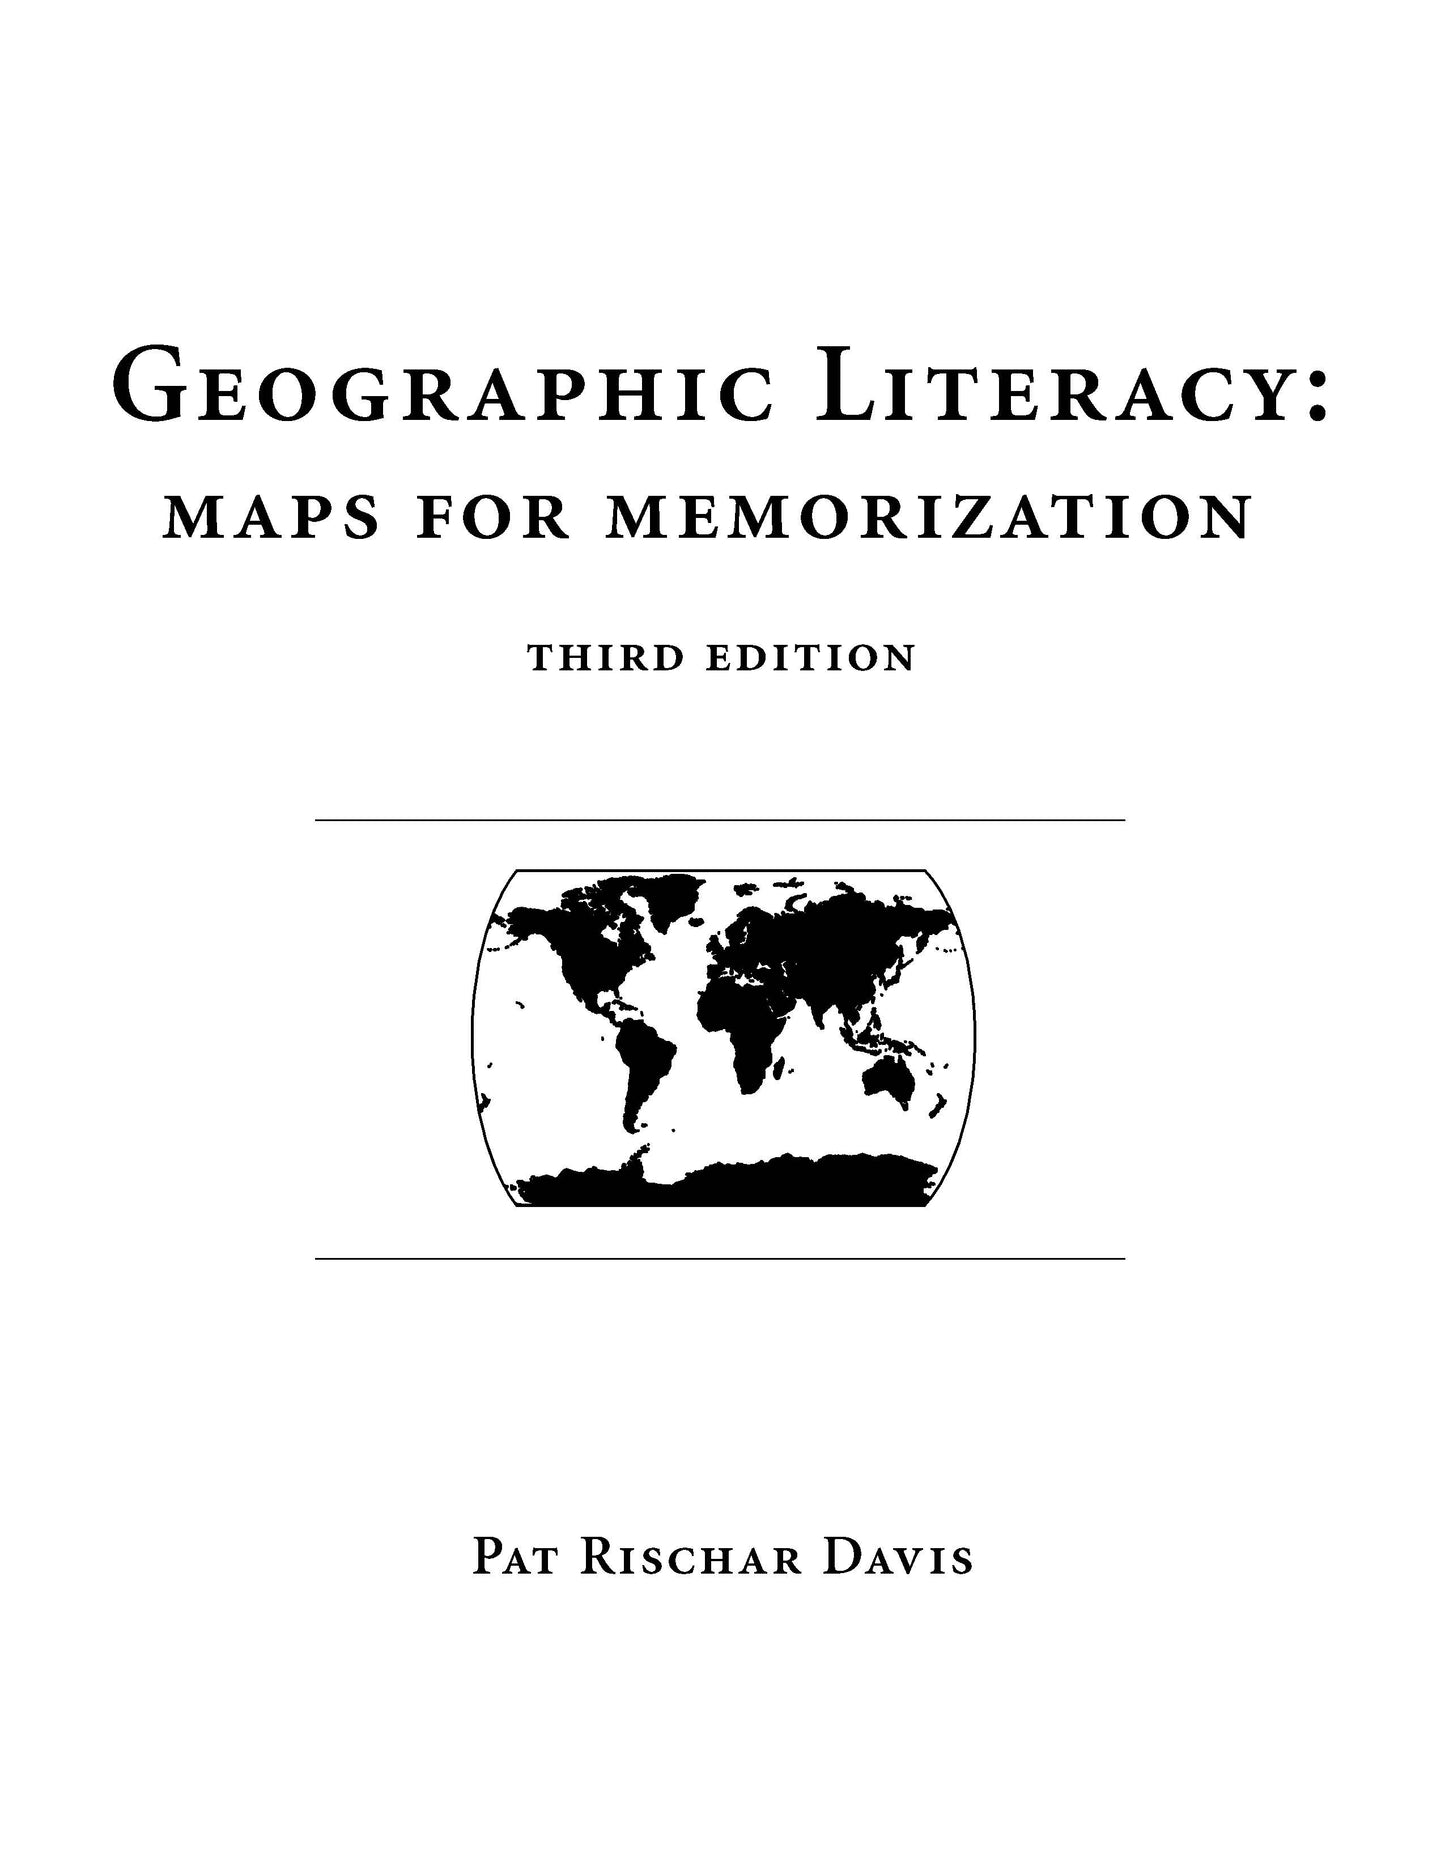 Geographic literacy, Maps for memorization, Geography teaching resources, Memorization exercises, Reproducible maps, Regional geography units, Physical and political maps, Map test with answer key, Classroom learning aids, Geography curriculum support, Educational materials for humanities, Geography teachers' toolkit, Student-friendly map learning, Essential physical features, Hands-on geography